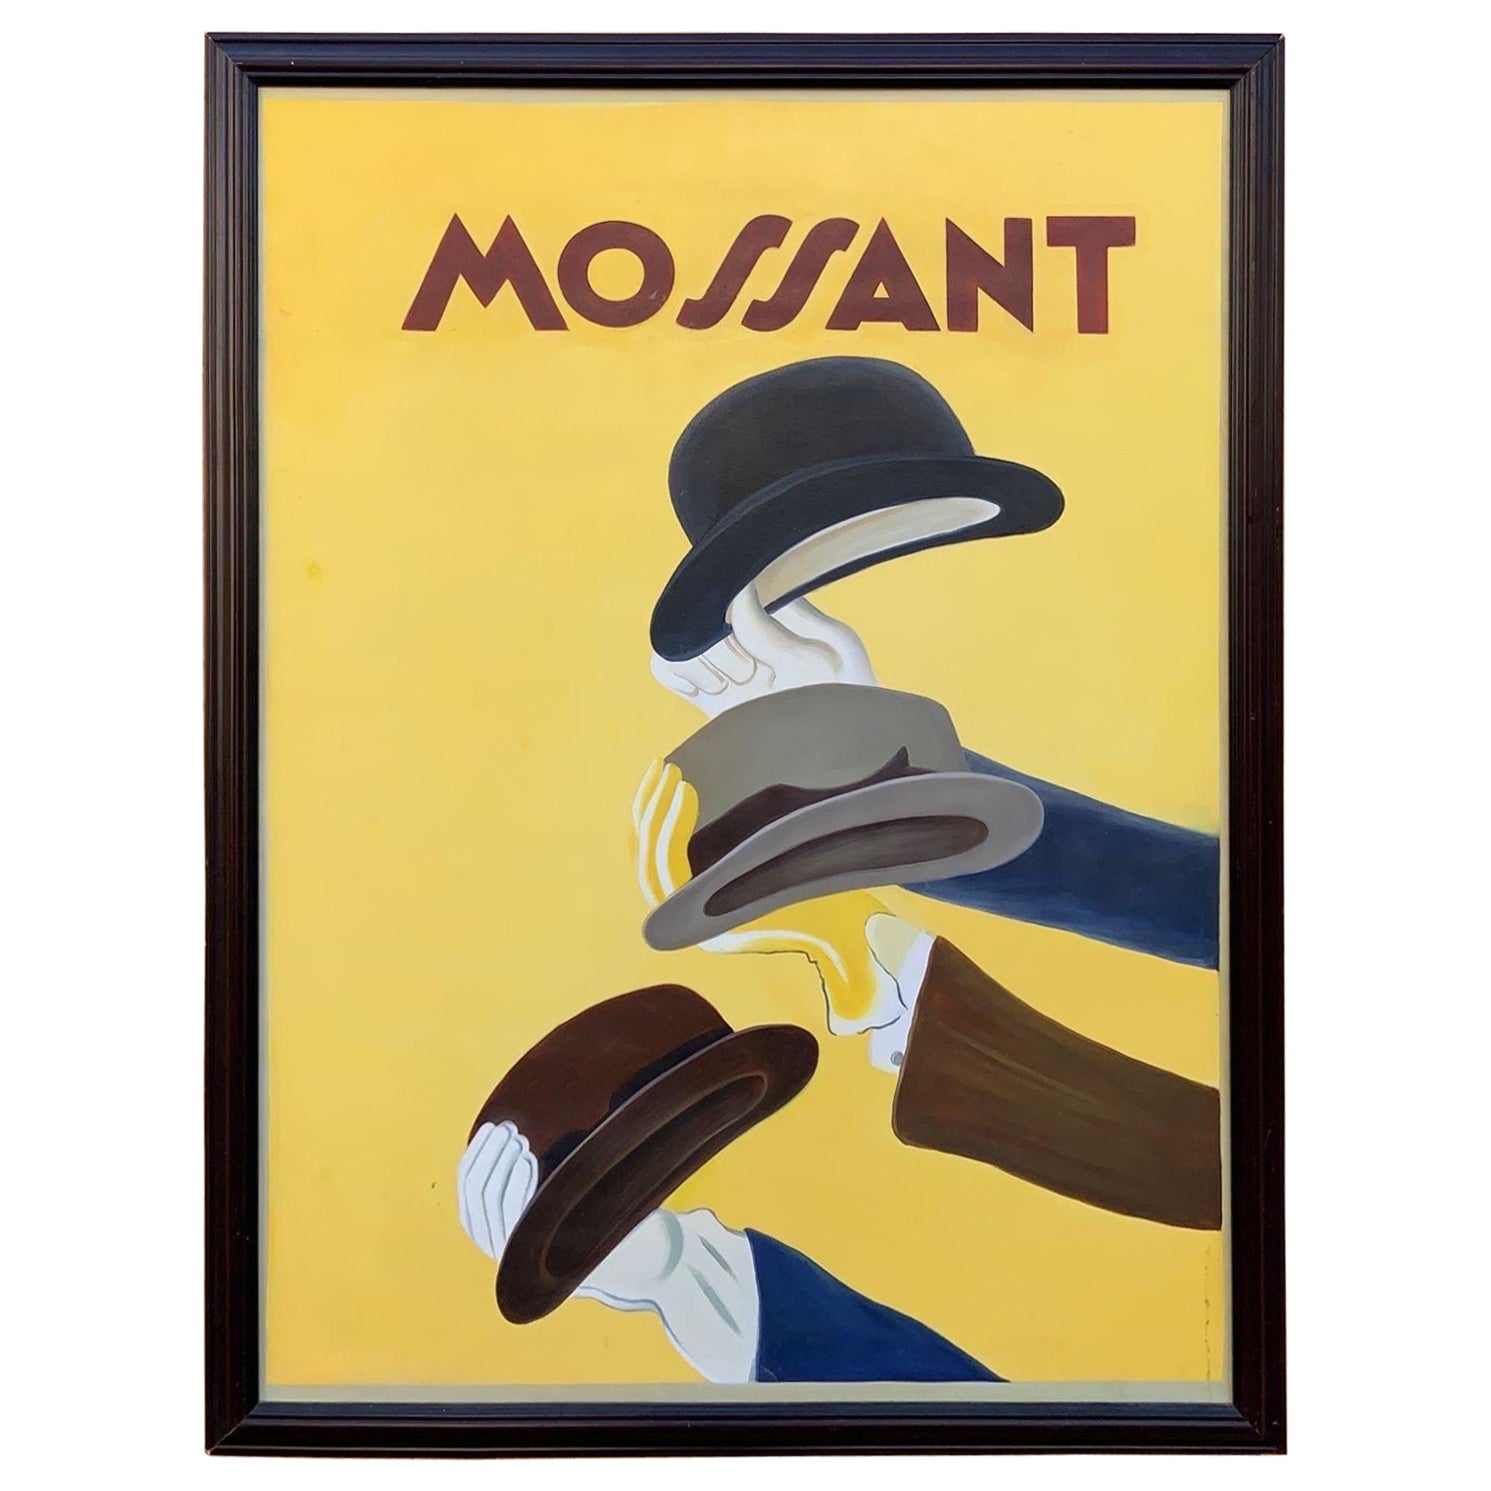 Vintage Art Deco Poster by Leonetto Cappiello Mossant Hats For Sale